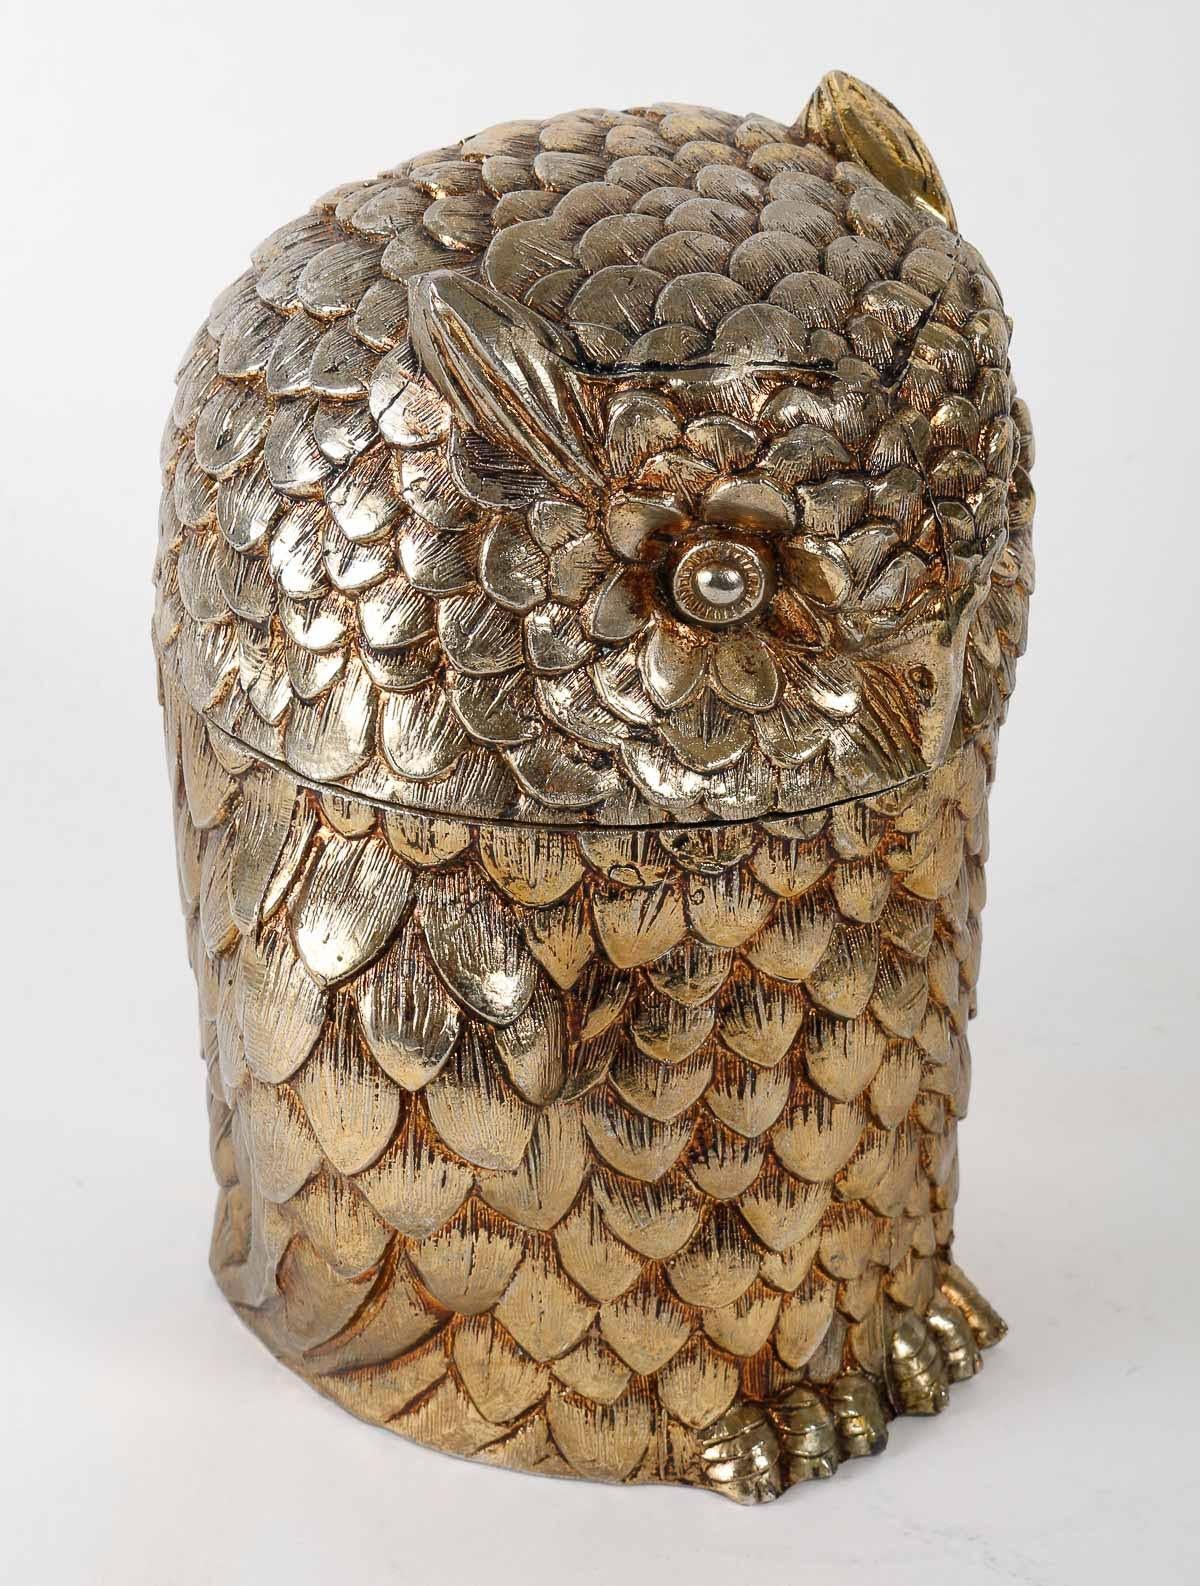 Ice bucket by Mauro Manetti, 1970, made in Italy.

Silver-plated metal ice bucket by Mauro Manetti representing an owl, 1970, made in Italy.  

H: 20cm , W: 17cm, D: 13cm